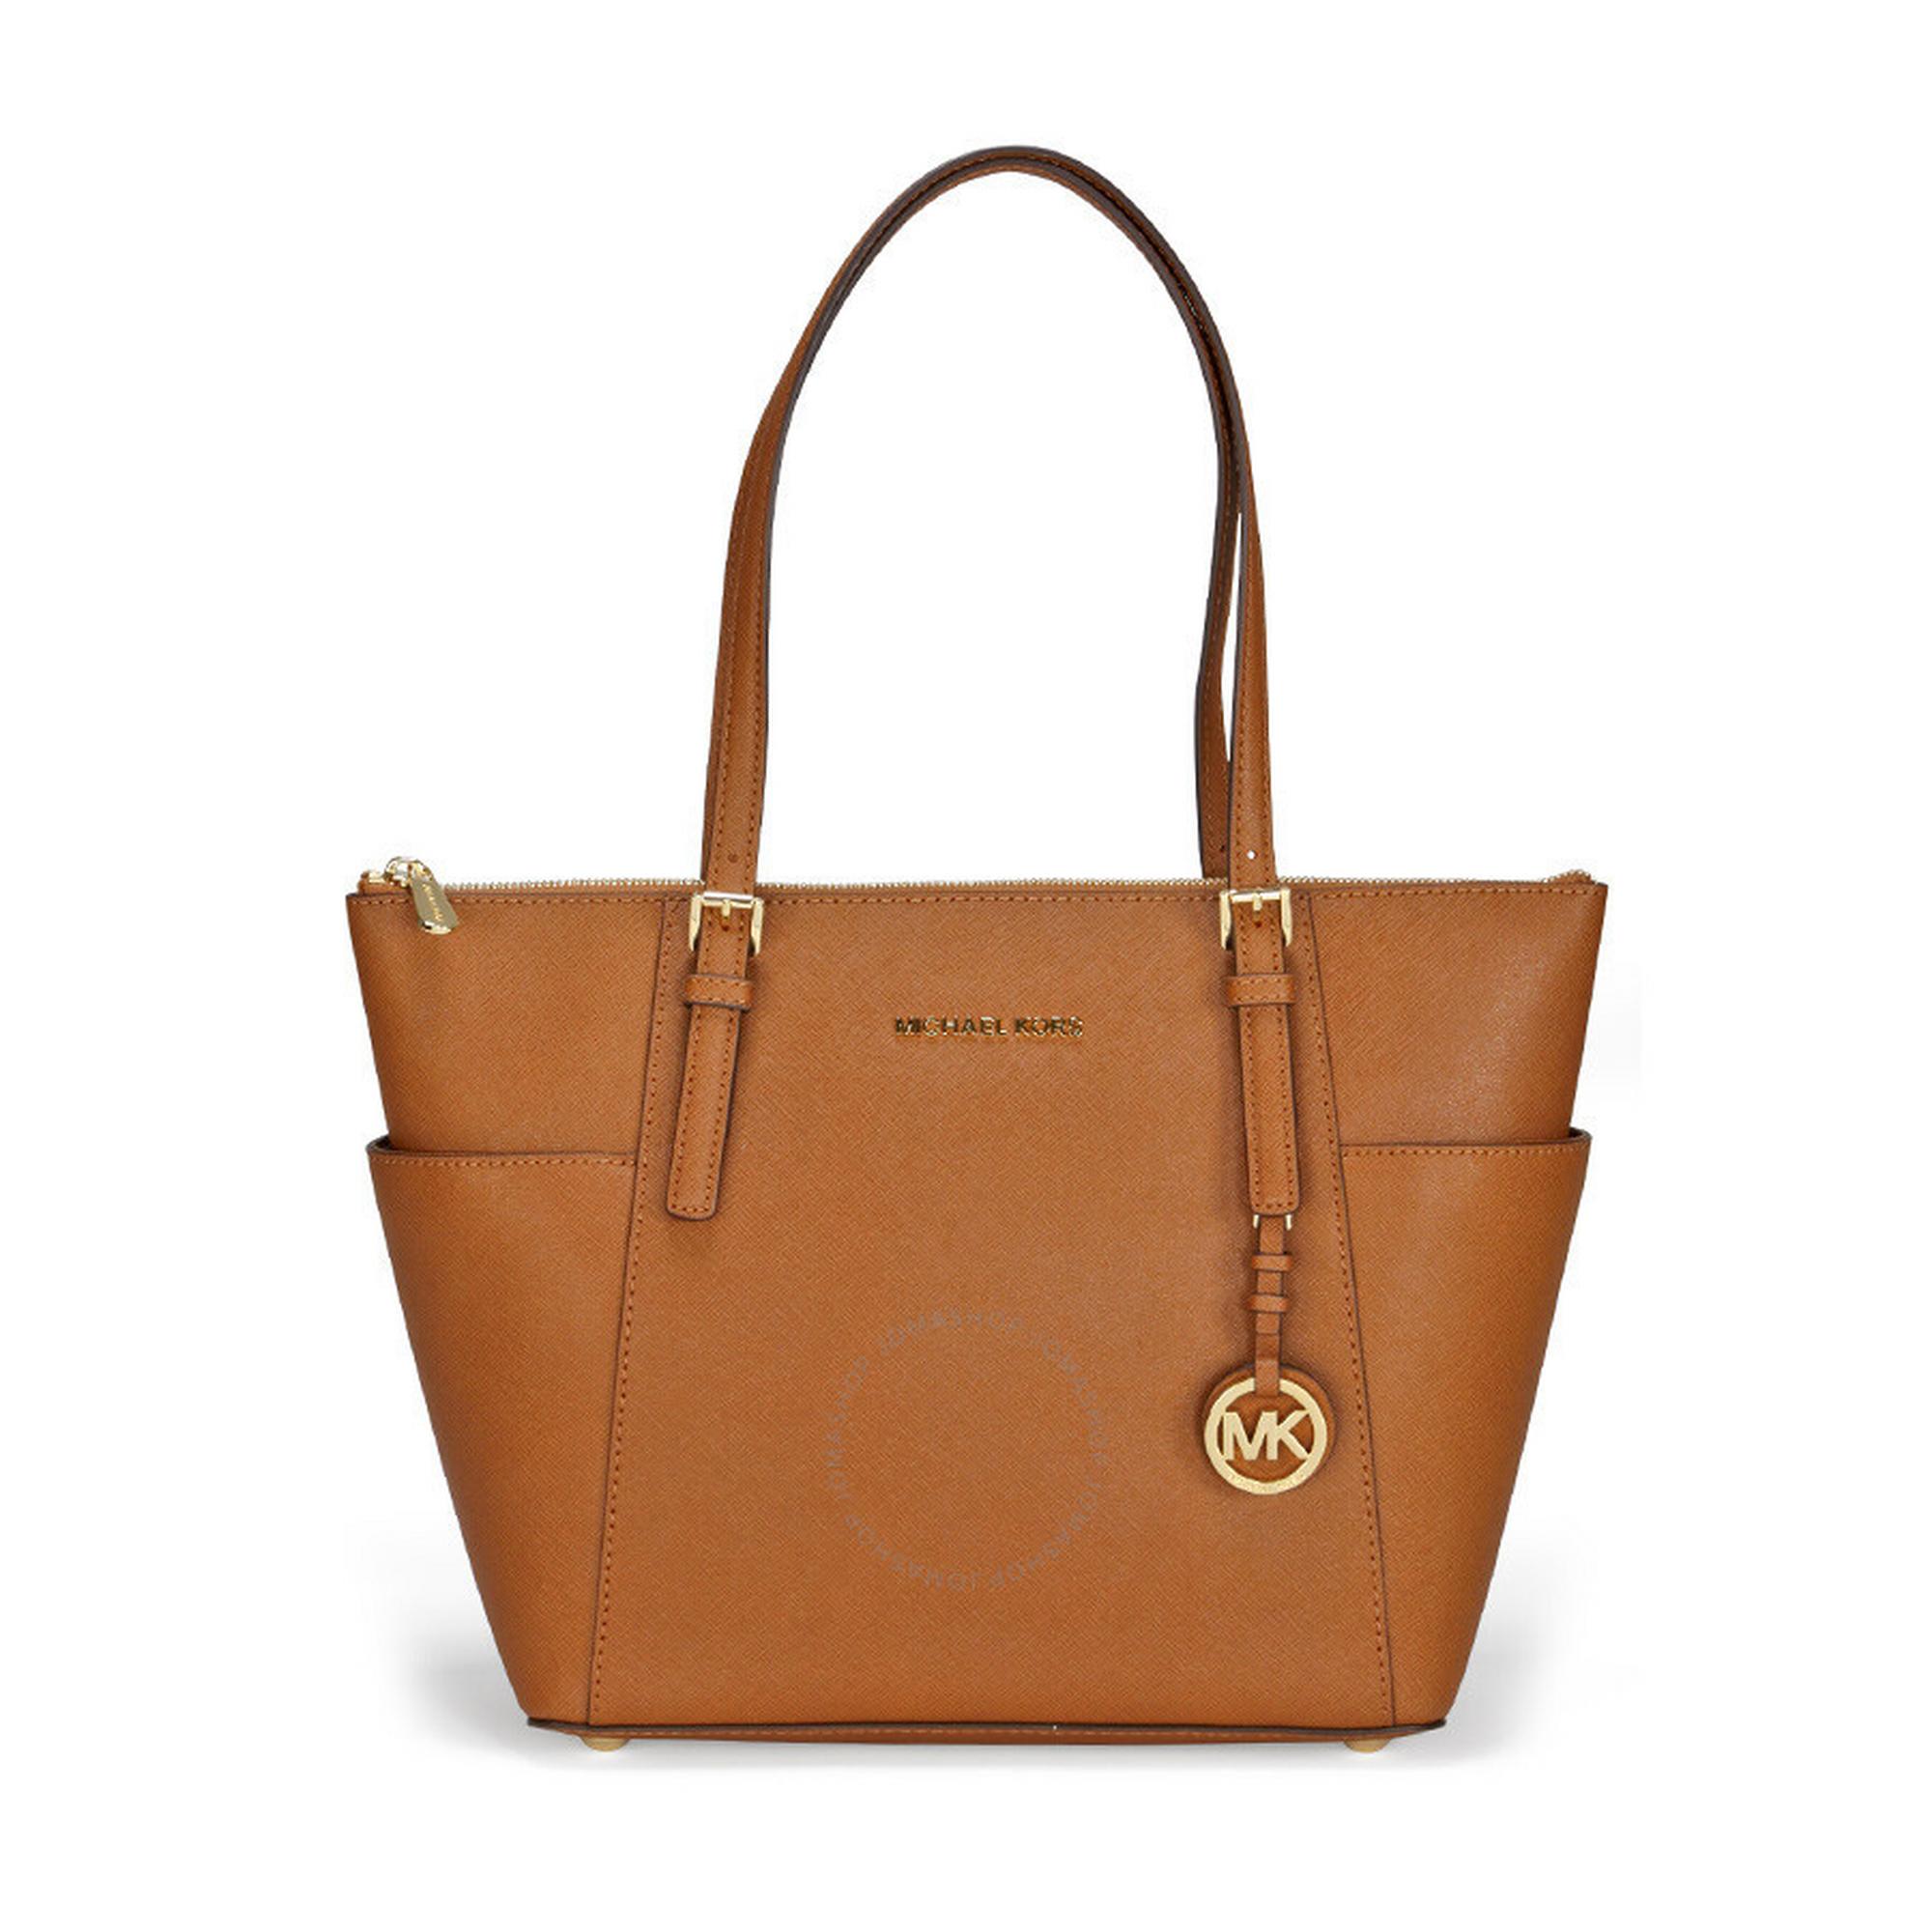 Rent to Own Michael Kors Jet Set Item EW Tote at Aaron's today!